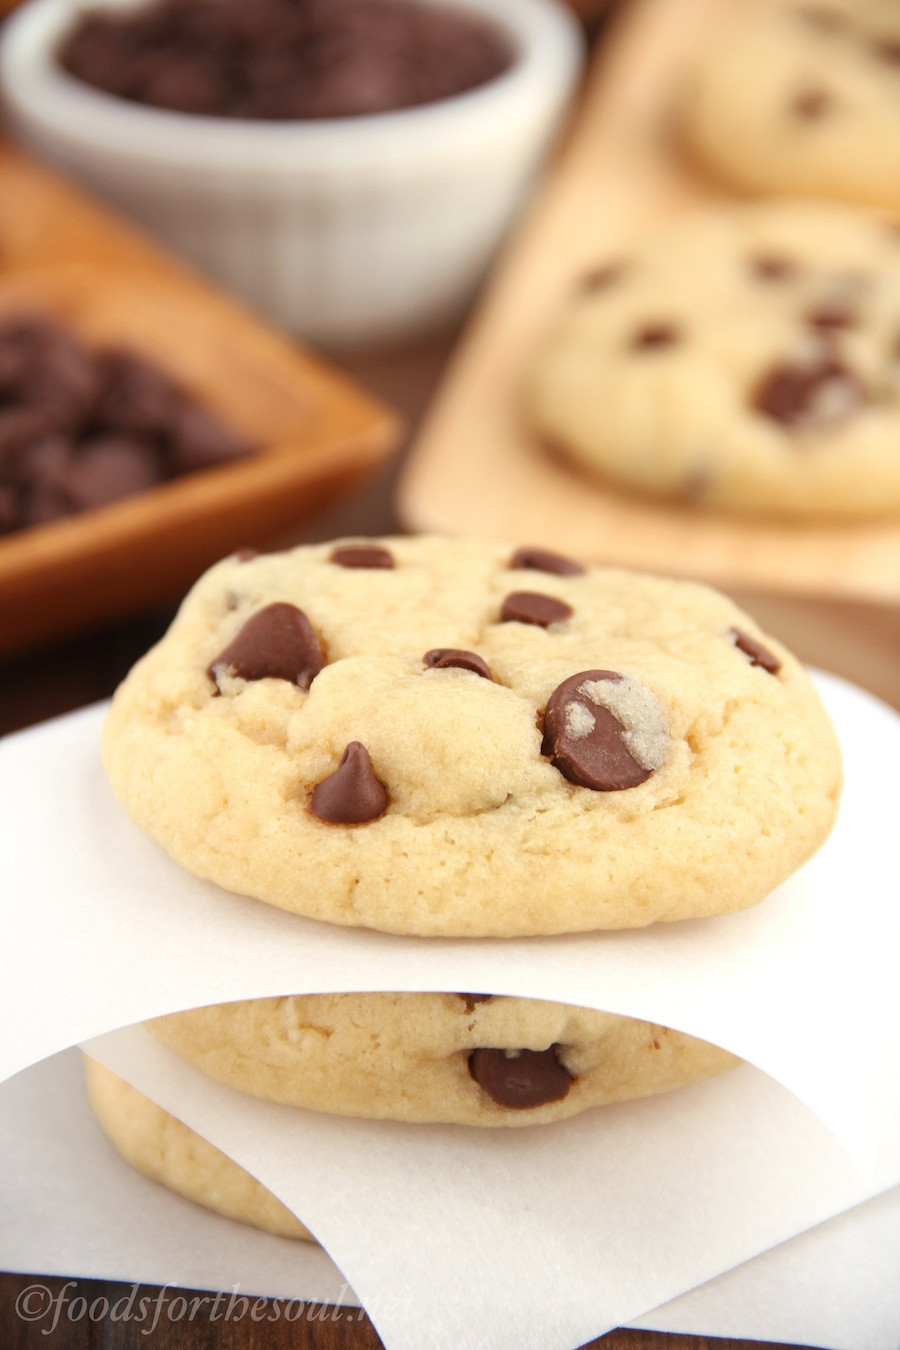 Soft Chewy Choc Chip Cookies Recipe
 The Ultimate Healthy Soft & Chewy Chocolate Chip Cookies